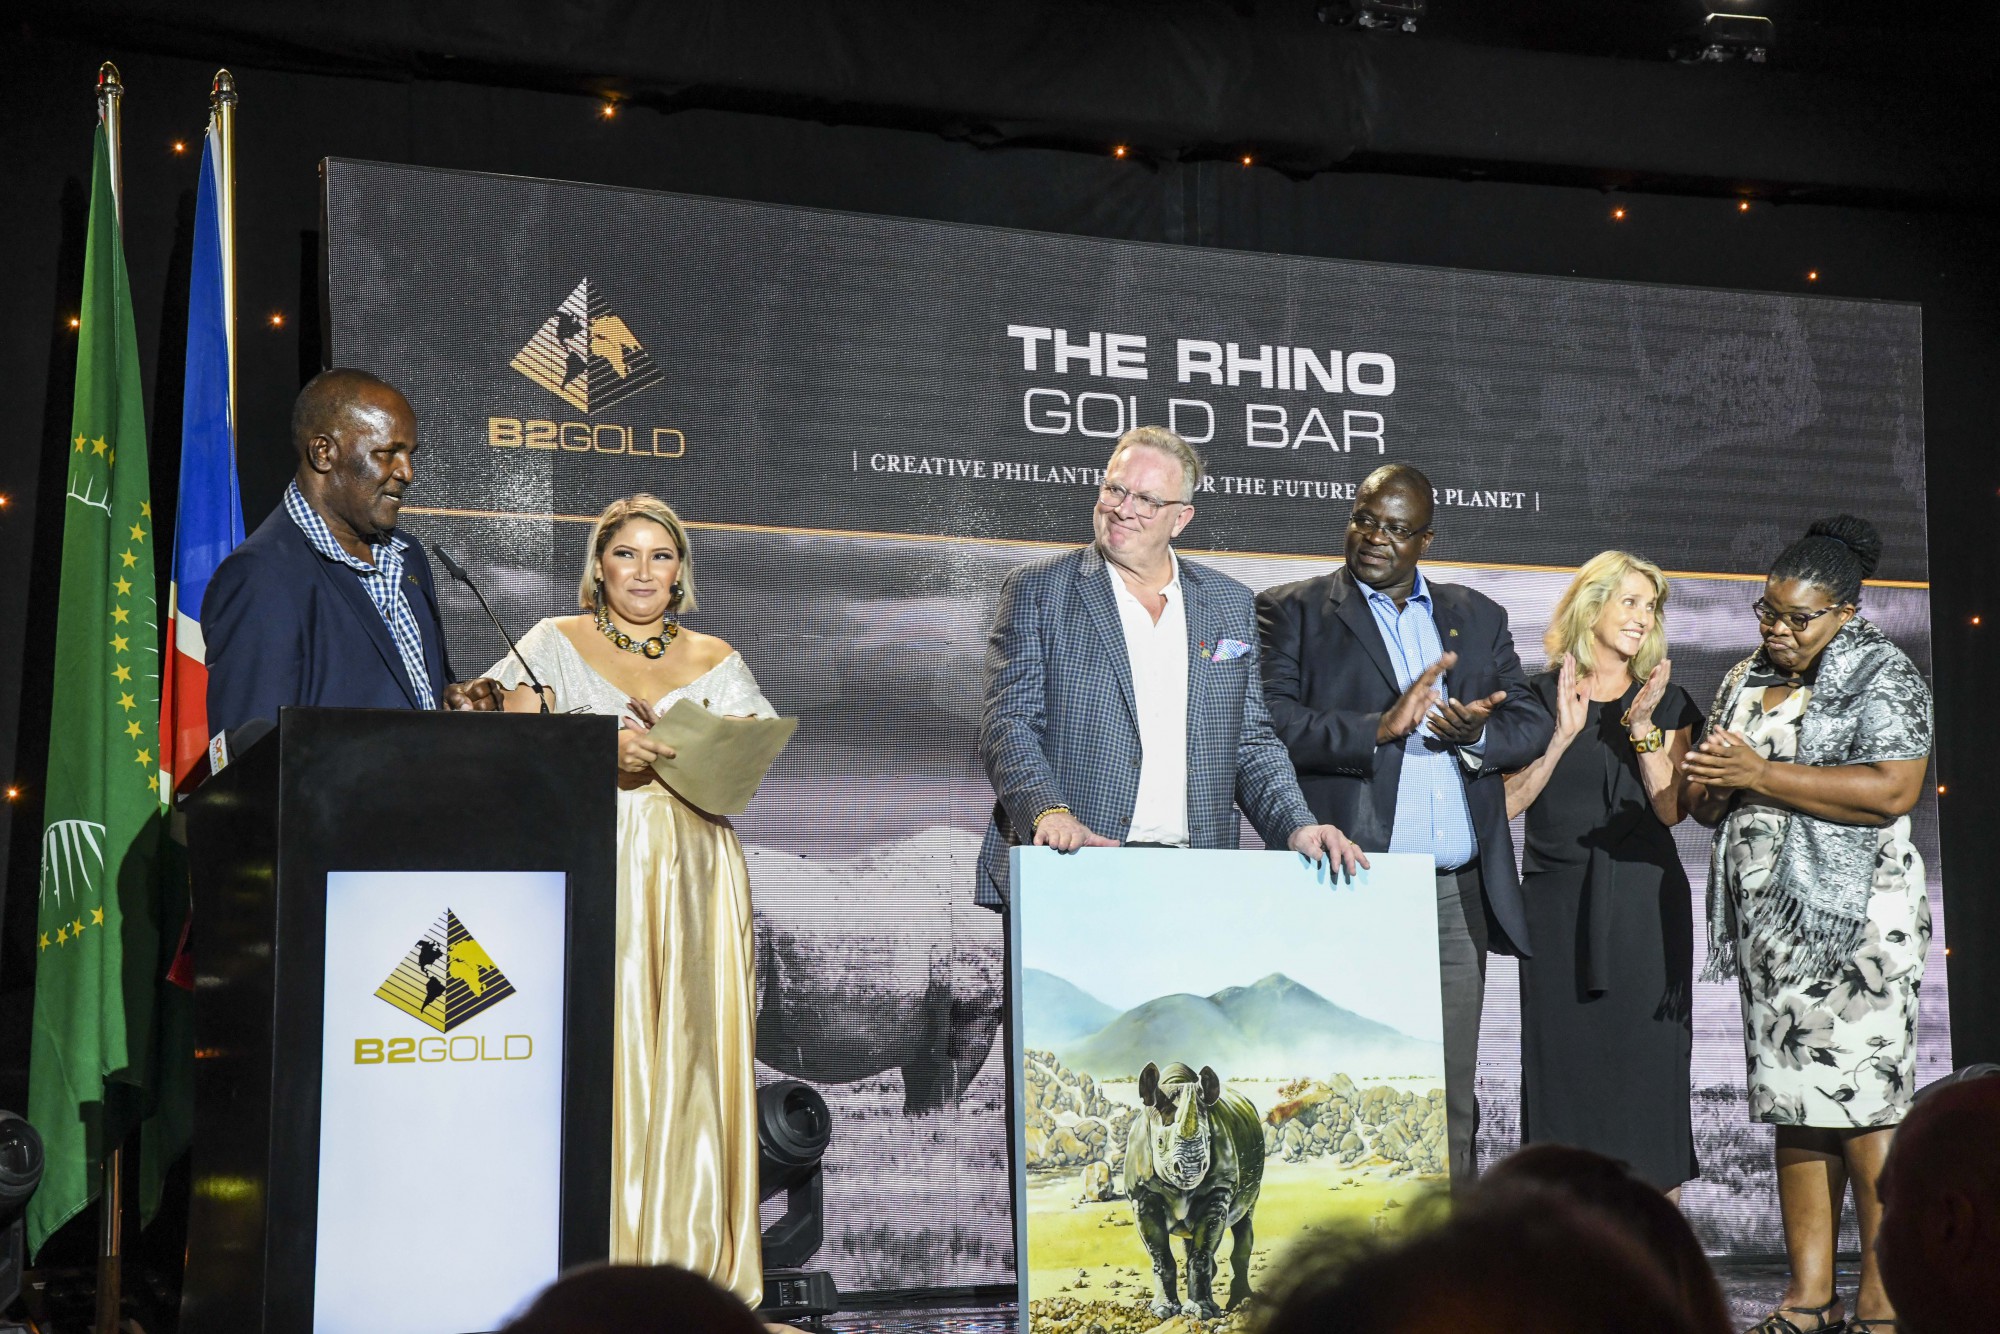 Members from Save the Rhino Trust “SRT” and Integrated Rural Development and Nature Conservation “IRDNC” presenting a token of their appreciation to Clive Johnson (President, CEO & Director, B2Gold Corp.).  From left to right: Simson Uri-Khob (CEO, SRT), Clive Johnson, John Kasaona (Executive Director, IRDNC), Ginger Mauney (Director, SRT) and Maxi Louis (Board of Trustees Chairperson, SRT)